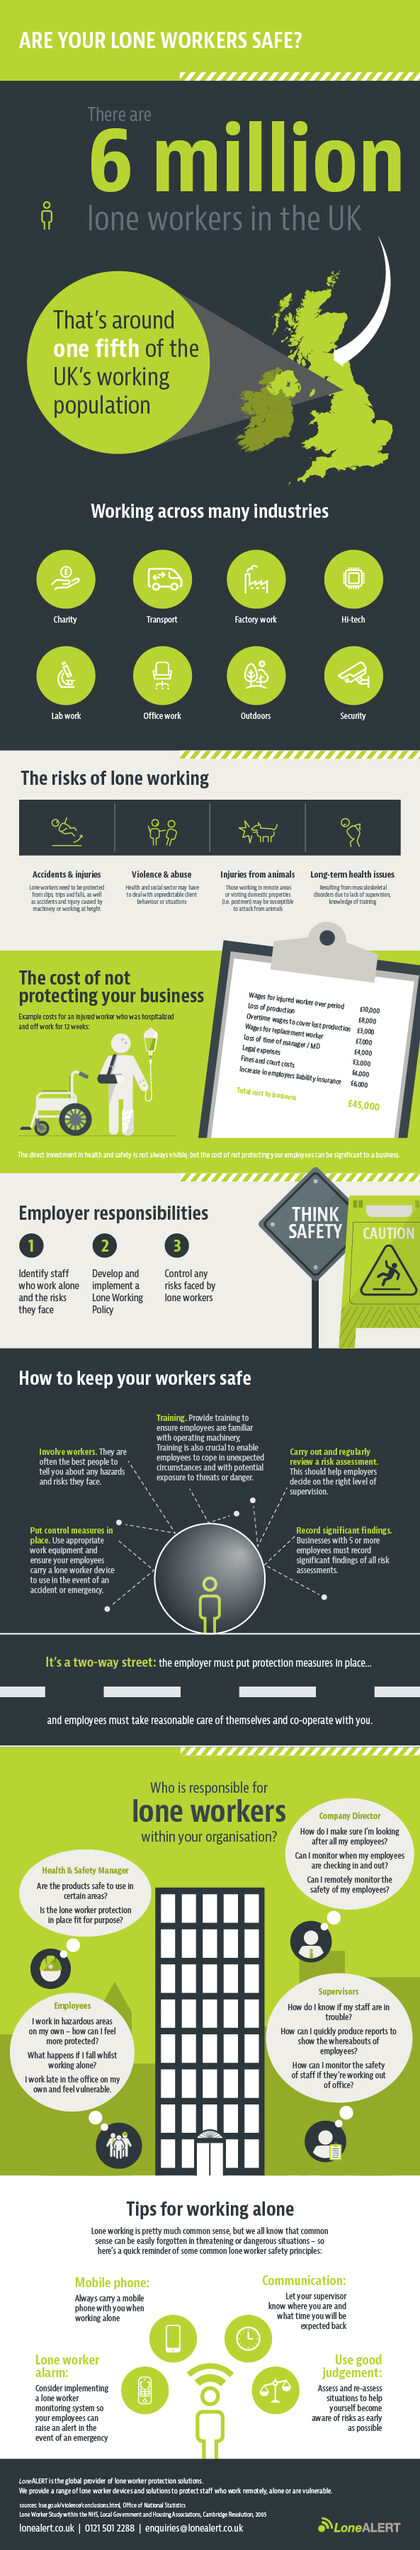 lone working infographic